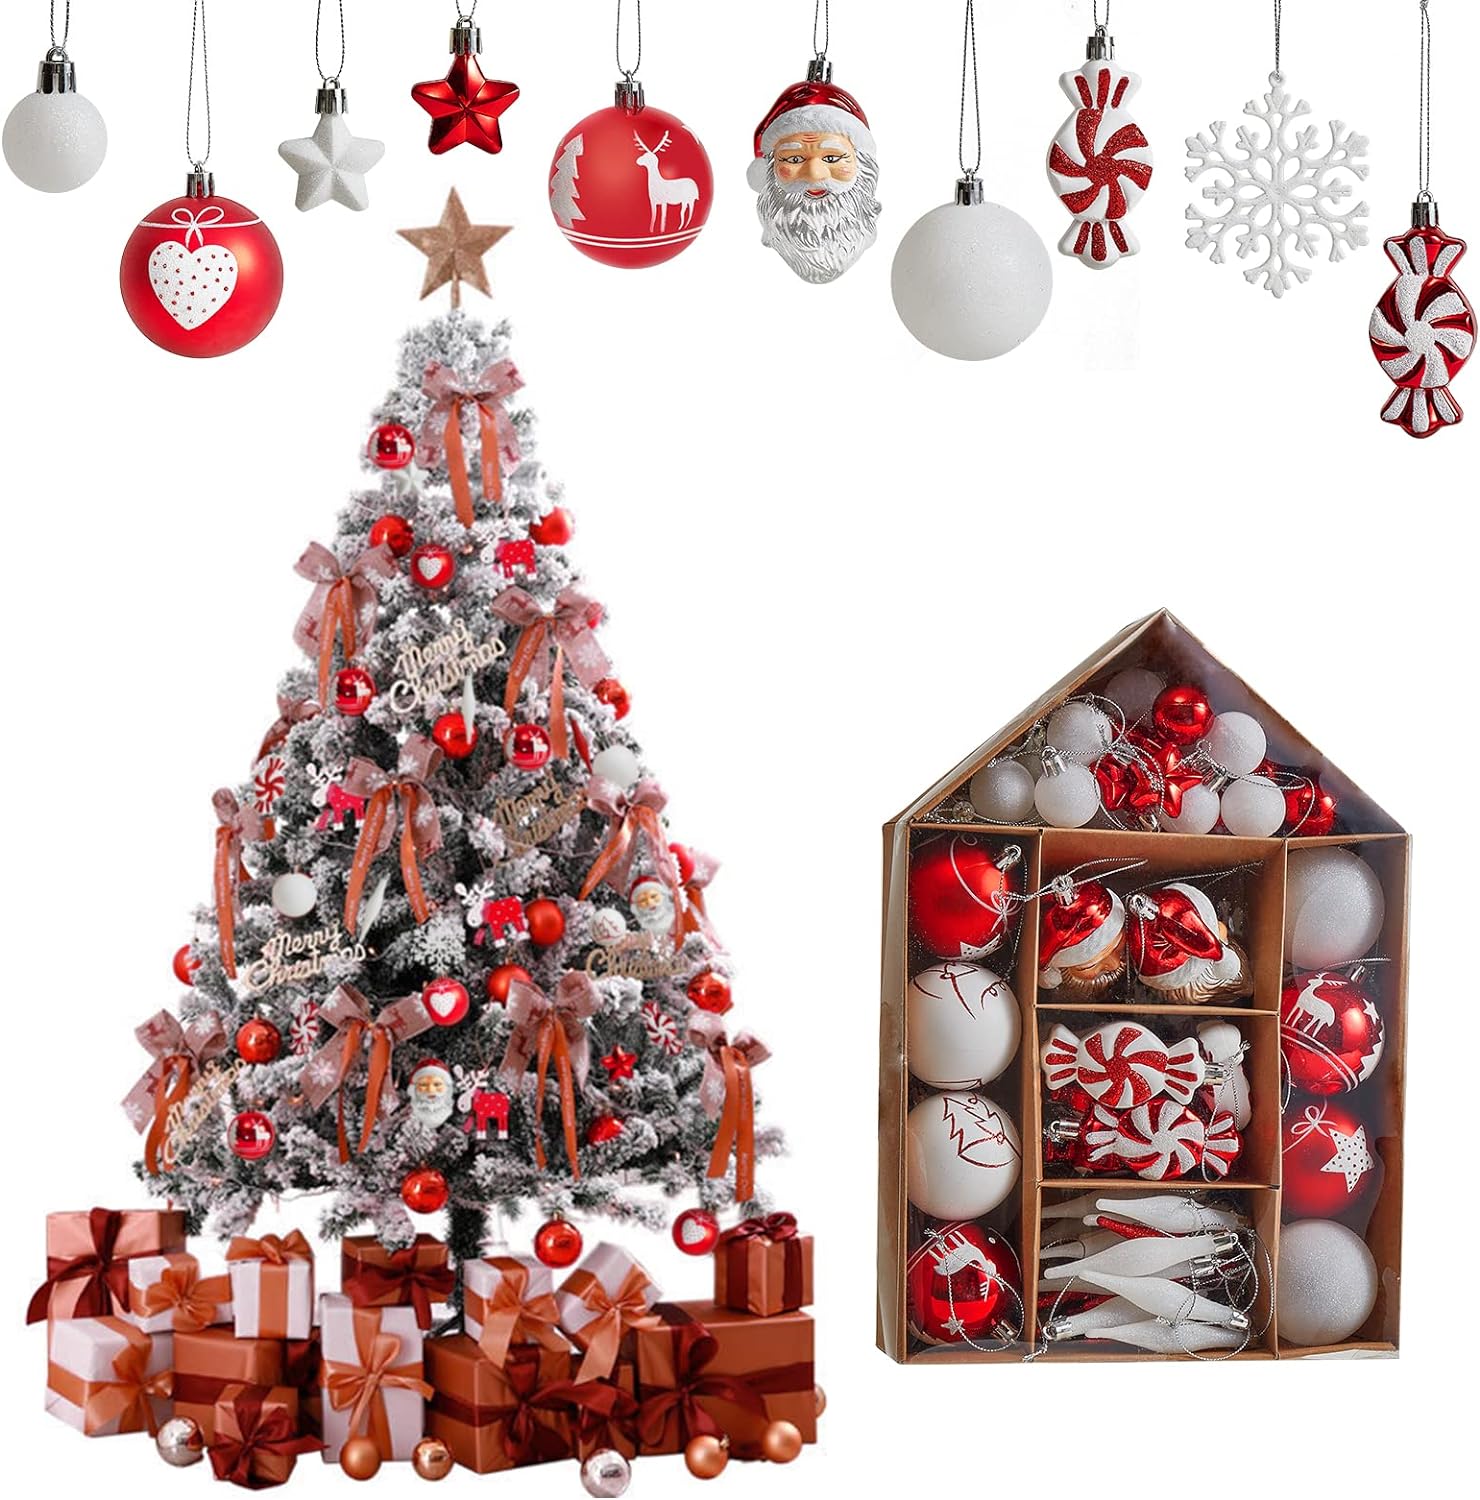 Christmas Tree Ornament Set, 70-Pack Shatterproof Assorted Christmas Tree Ornaments with Hanging Rope for Xmas Decorations Home Party, Holiday Wedding, Includes Santa Claus, Snowflakes, Candies, Etc. : Home Kitchen